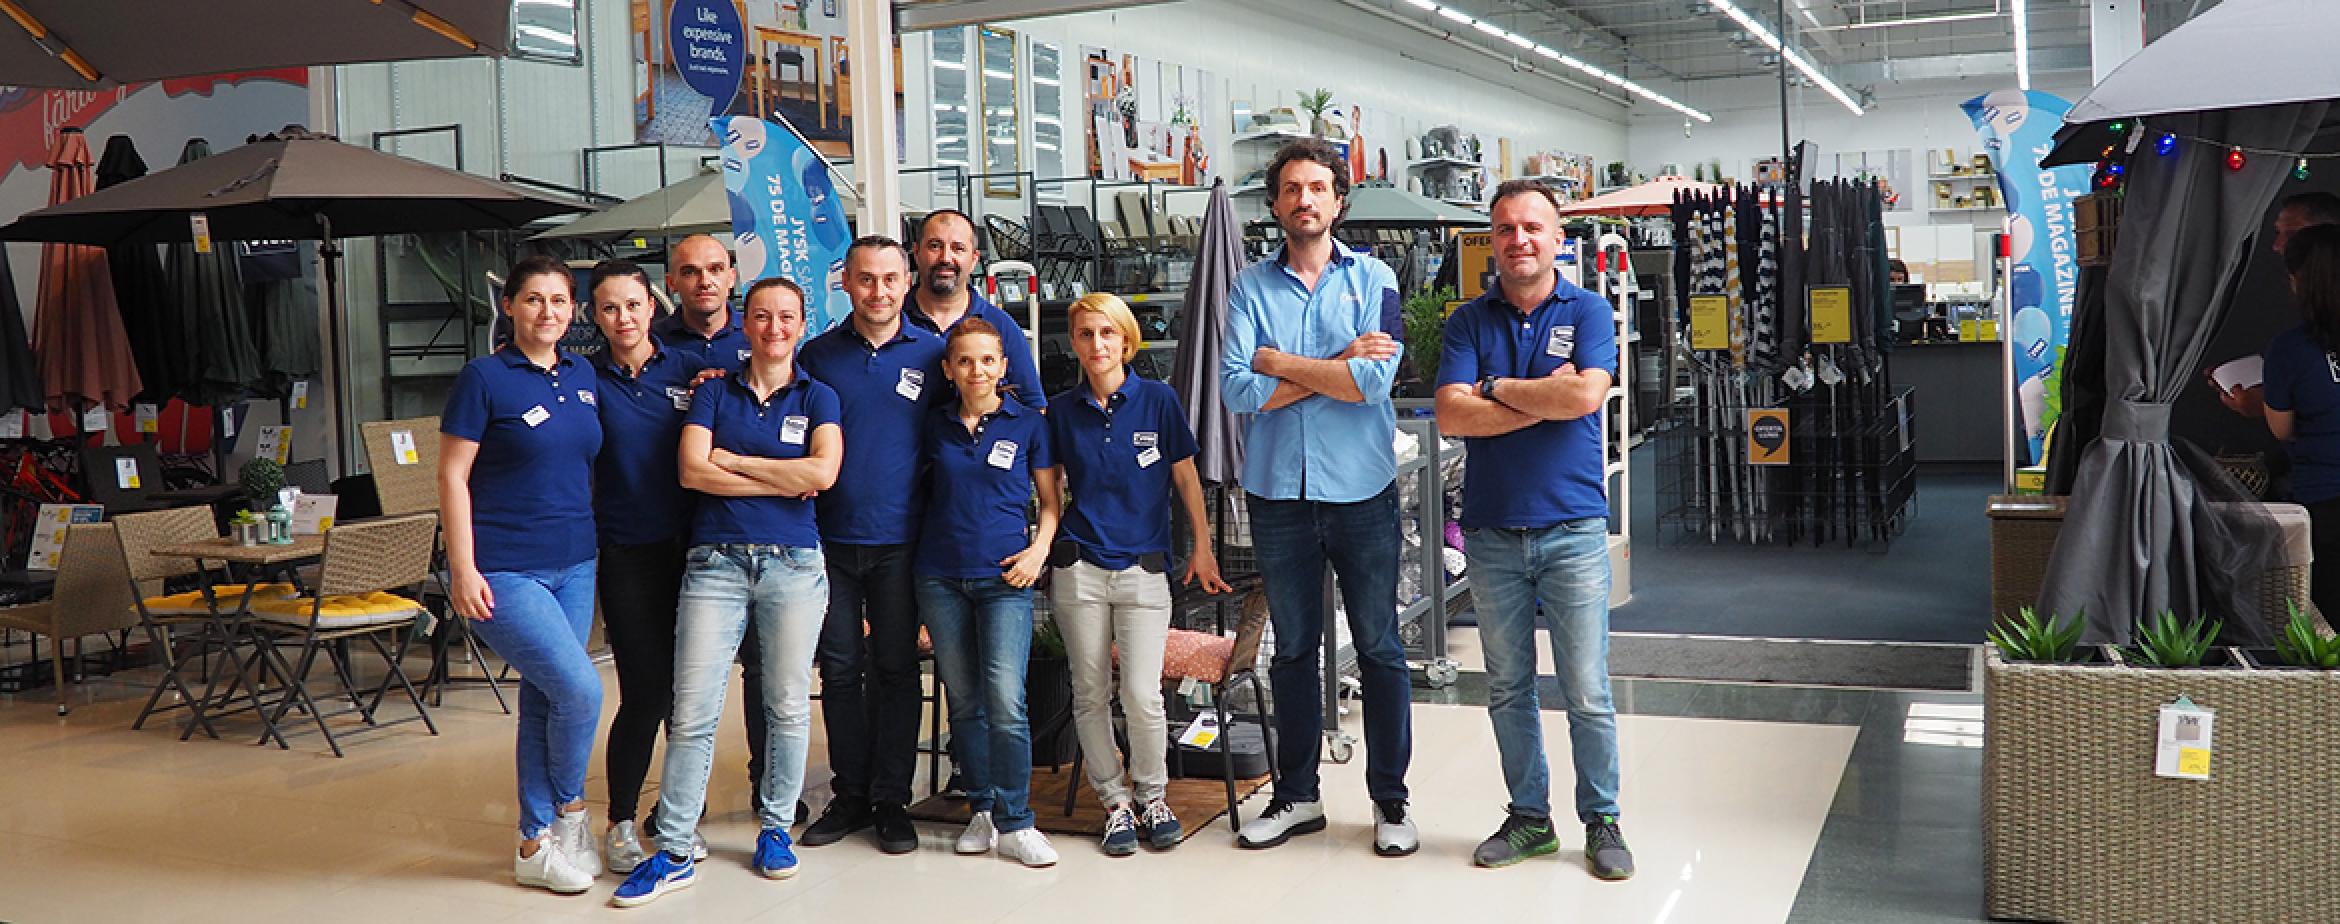 Romanian management team took over a store while the staff had a day off